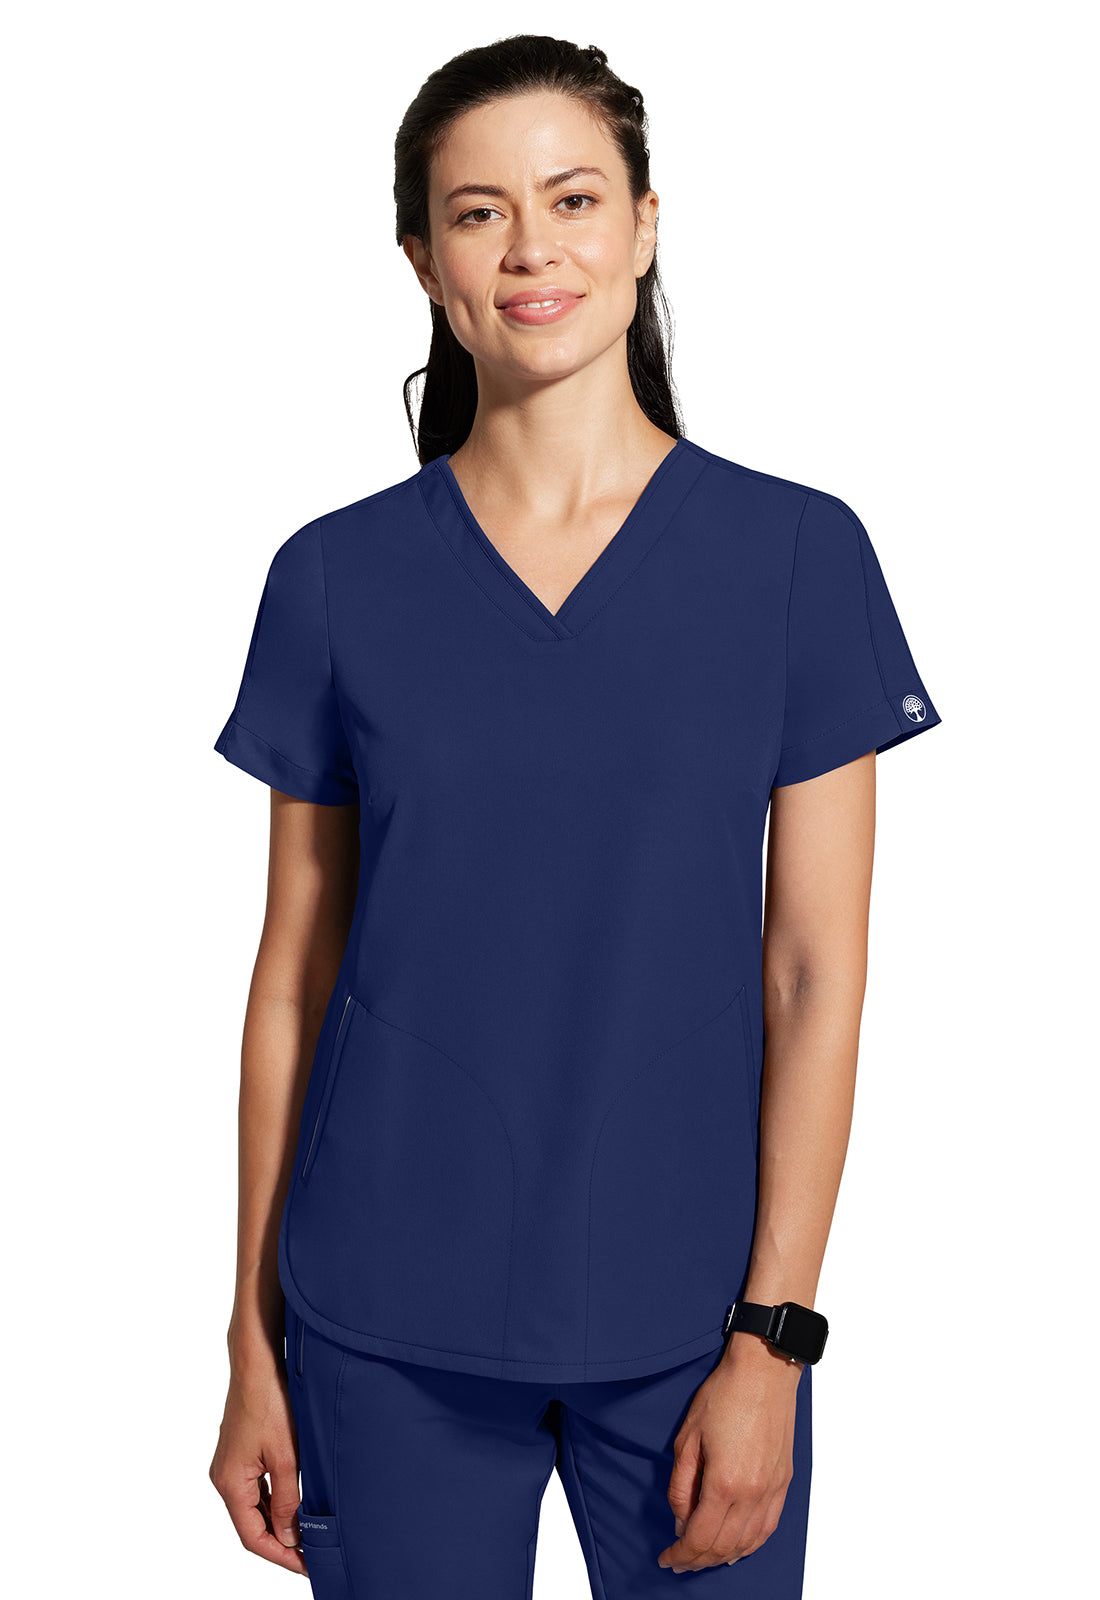 Healing Hands 360 Carly V-Neck Top Navy